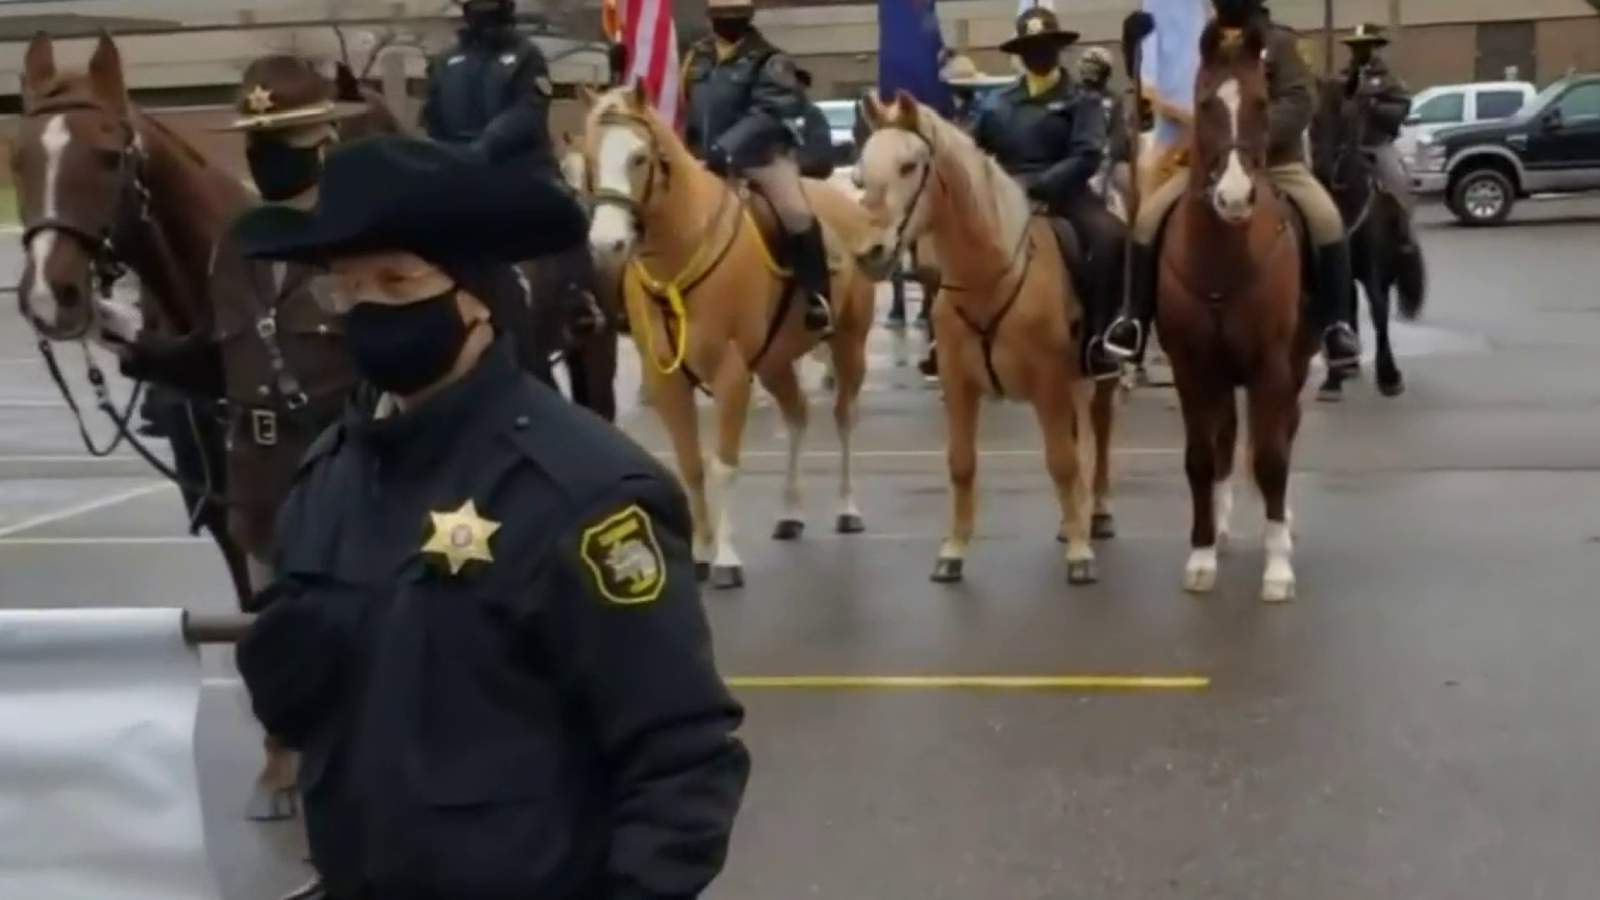 Michigan’s Multi-Jurisdictional Mounted Police Drill Team and Color Guard to perform virtually at Biden inauguration